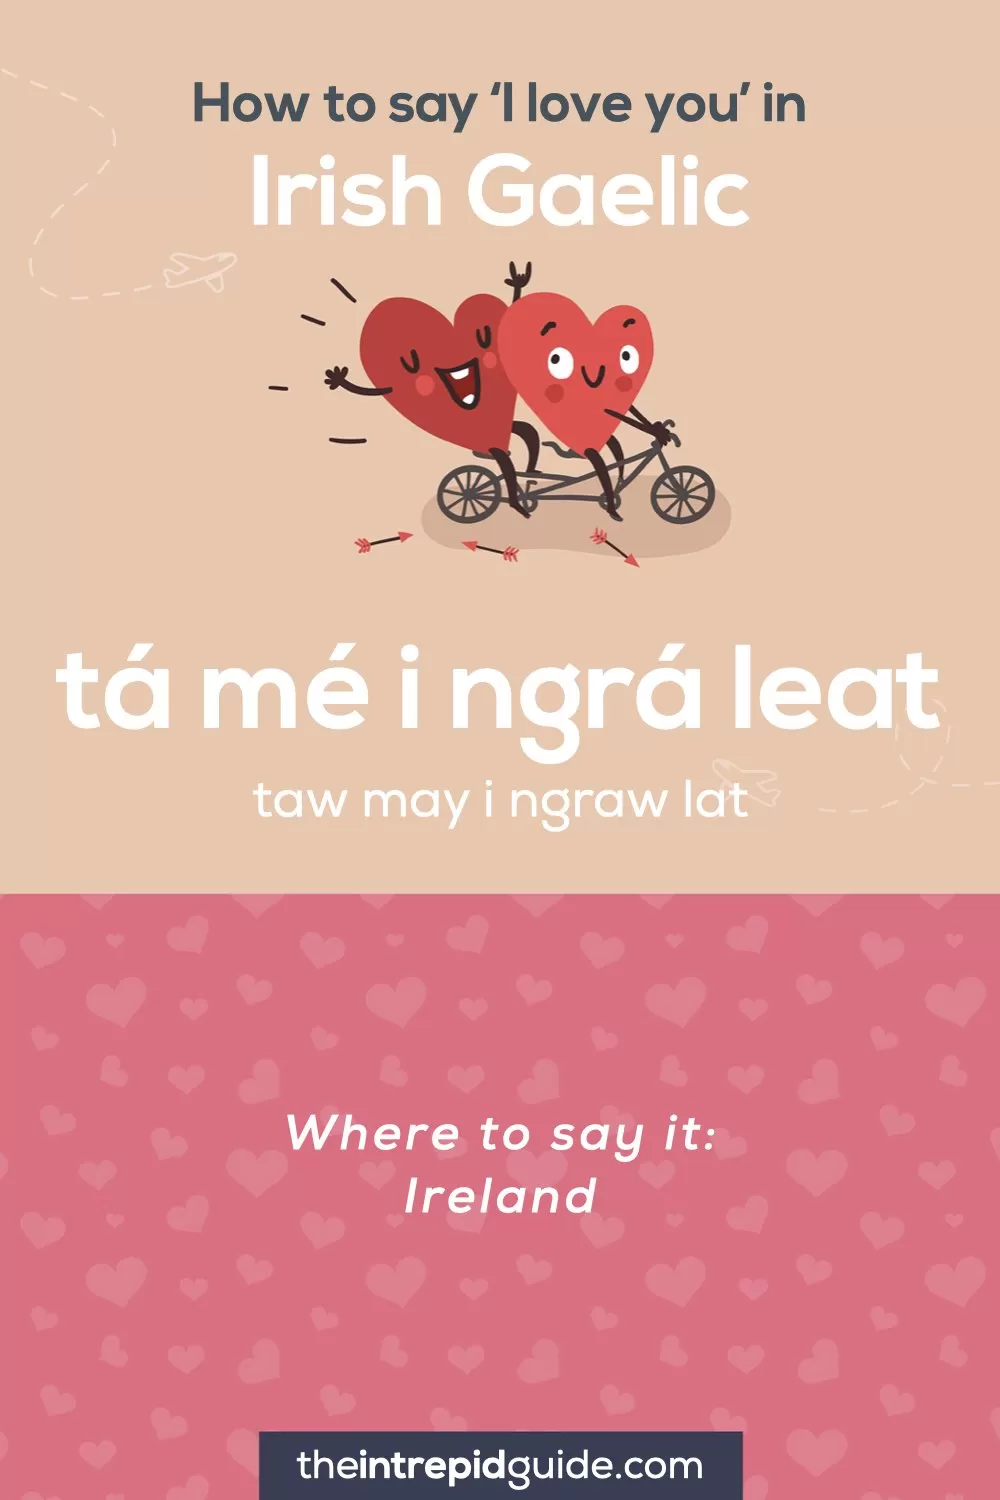 How to say I love you in different languages - Irish Gaelic - ta me i ngra leat